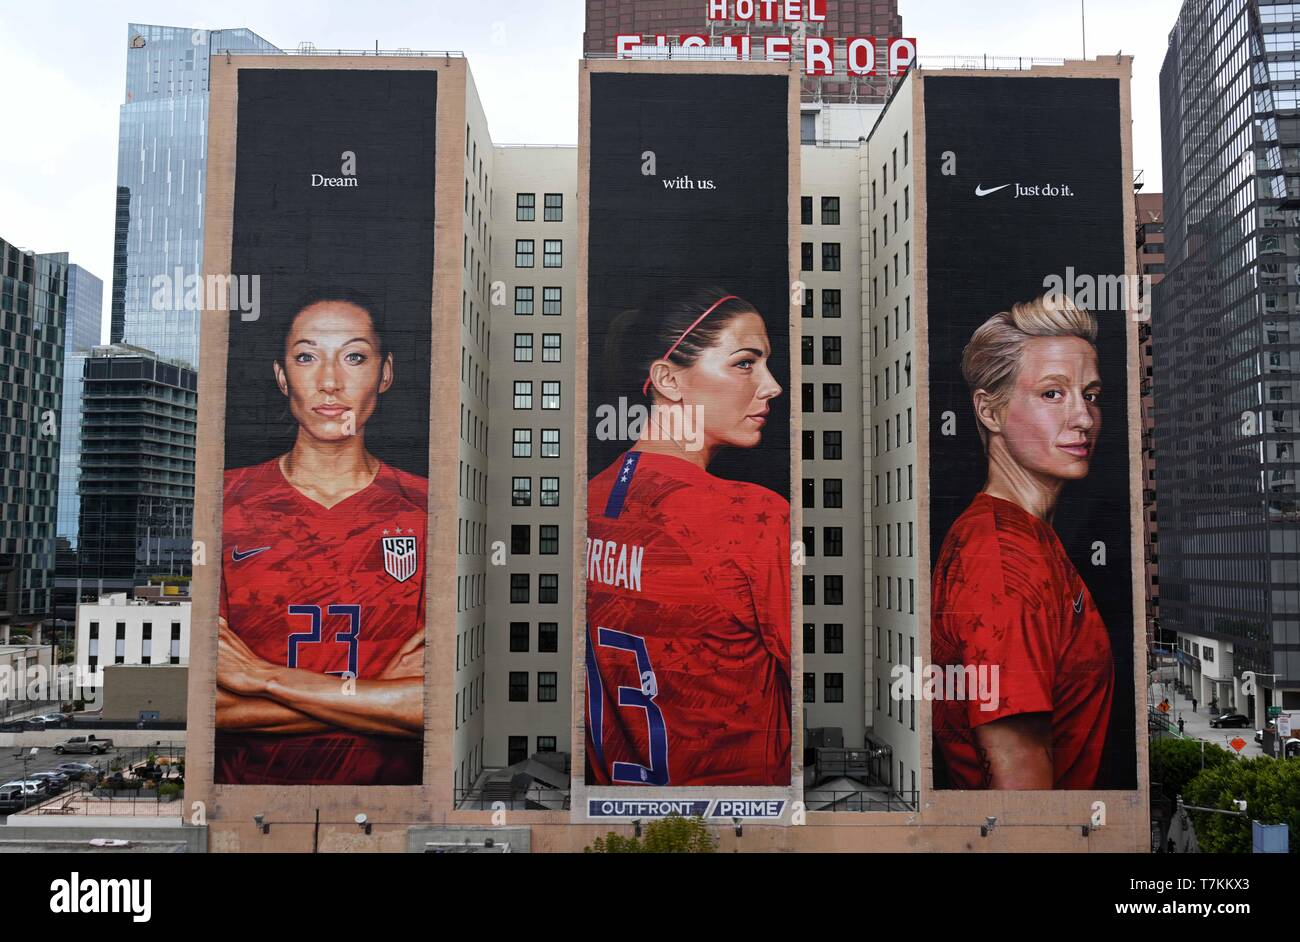 Los Angeles, United States. May, 2019. General overall view of Nike advertisement billboard featuring United States women's national team soccer forwards Christen Alex Morgan (center) and Morgan Rapinoe with